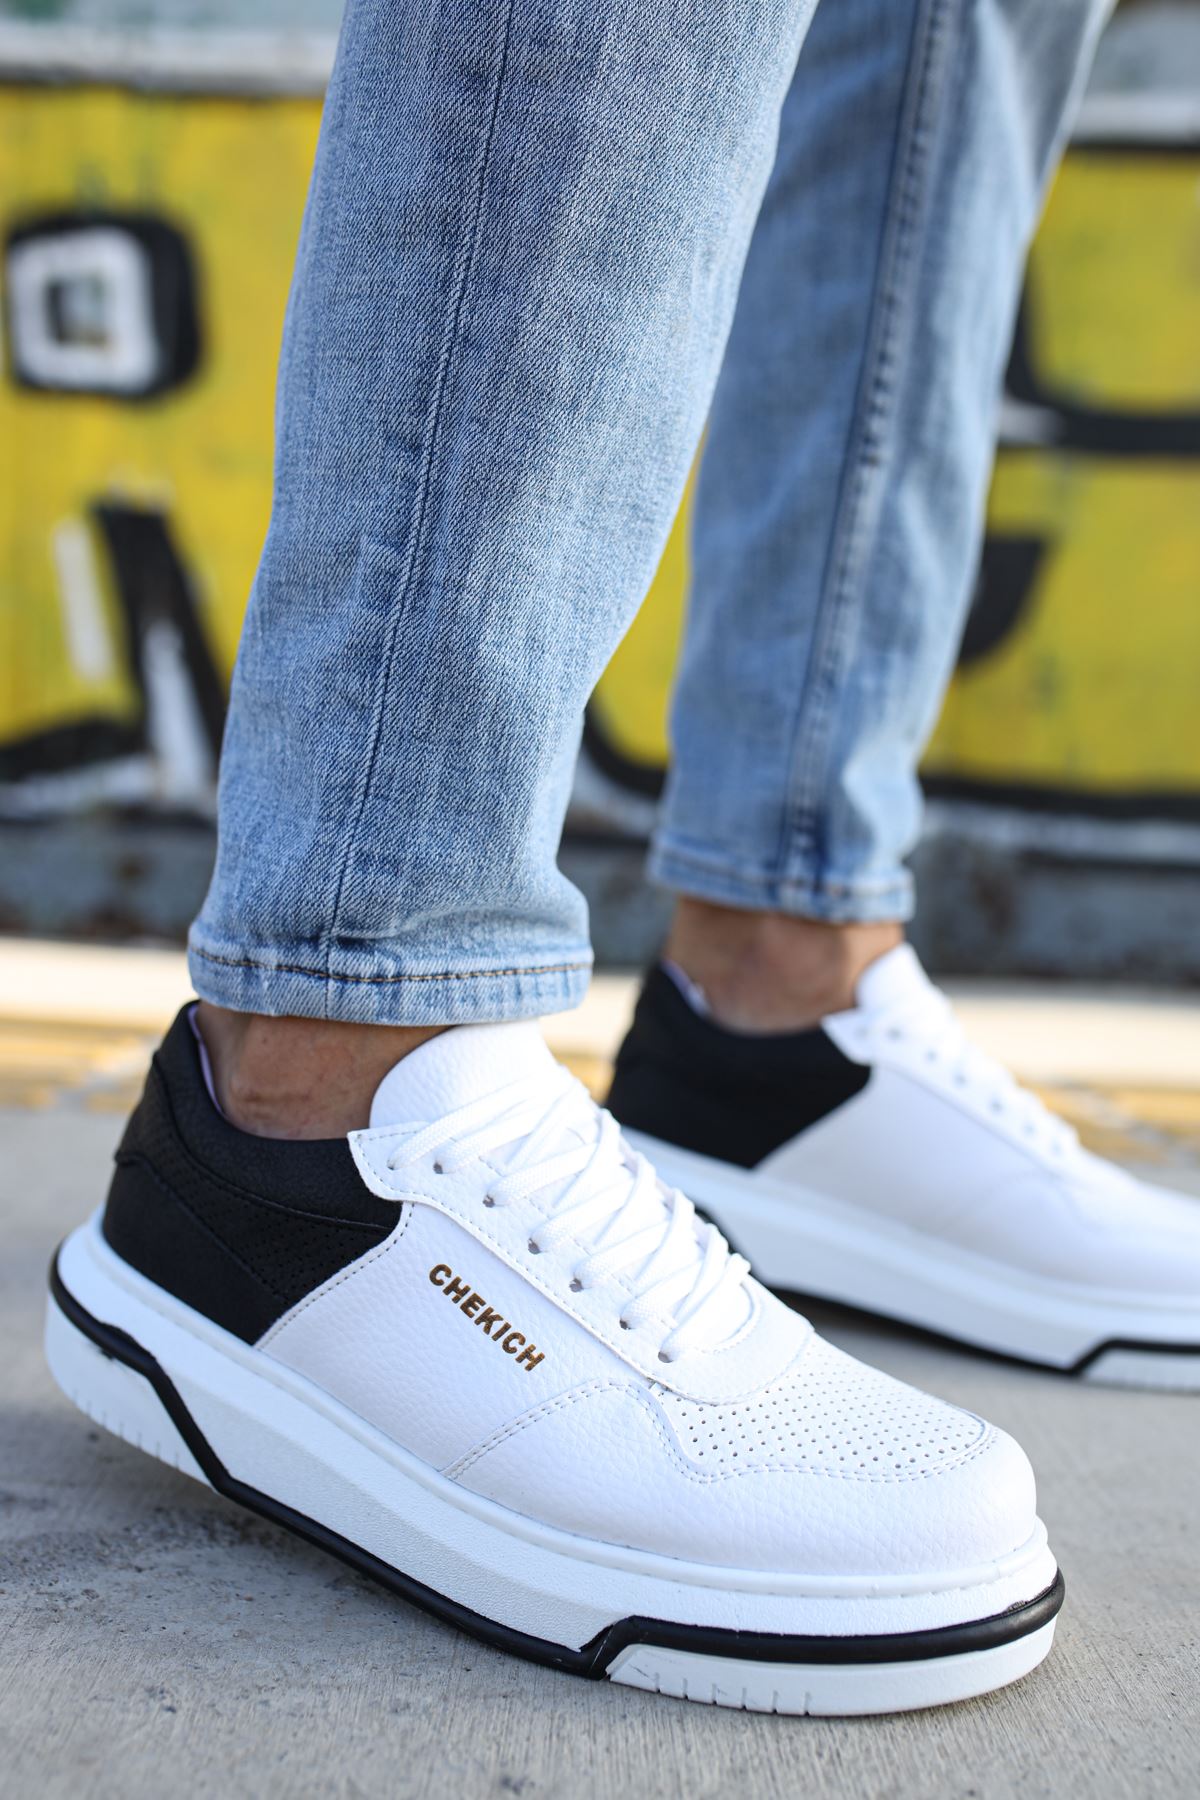 CH075 Men's Unisex White Casual Sneaker Sports Shoes - STREETMODE ™